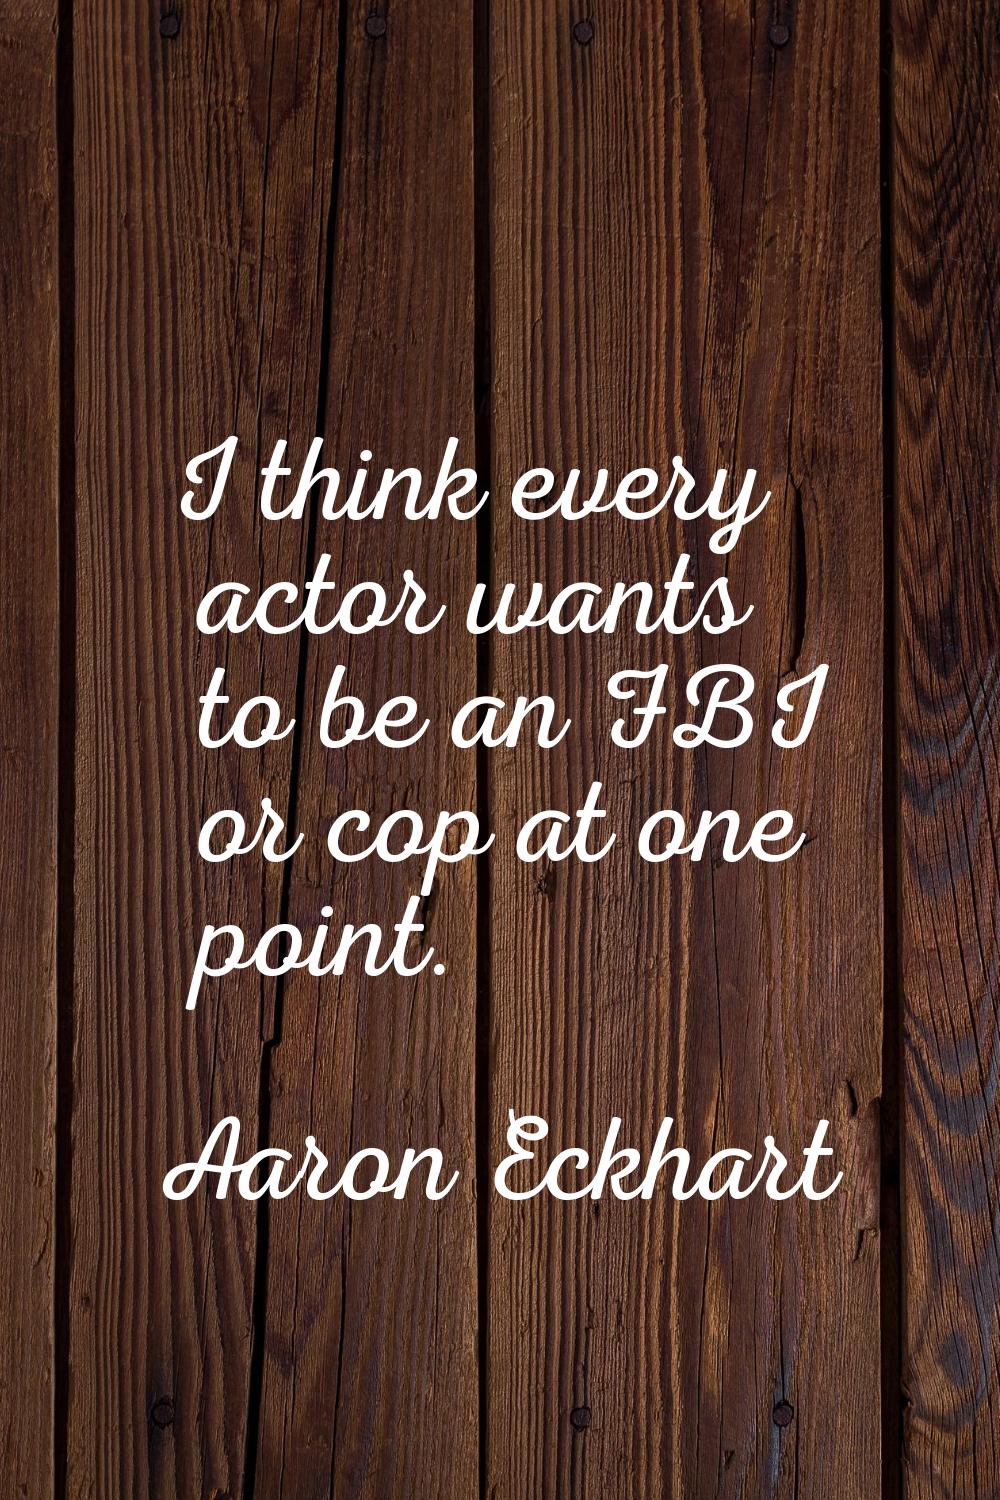 I think every actor wants to be an FBI or cop at one point.